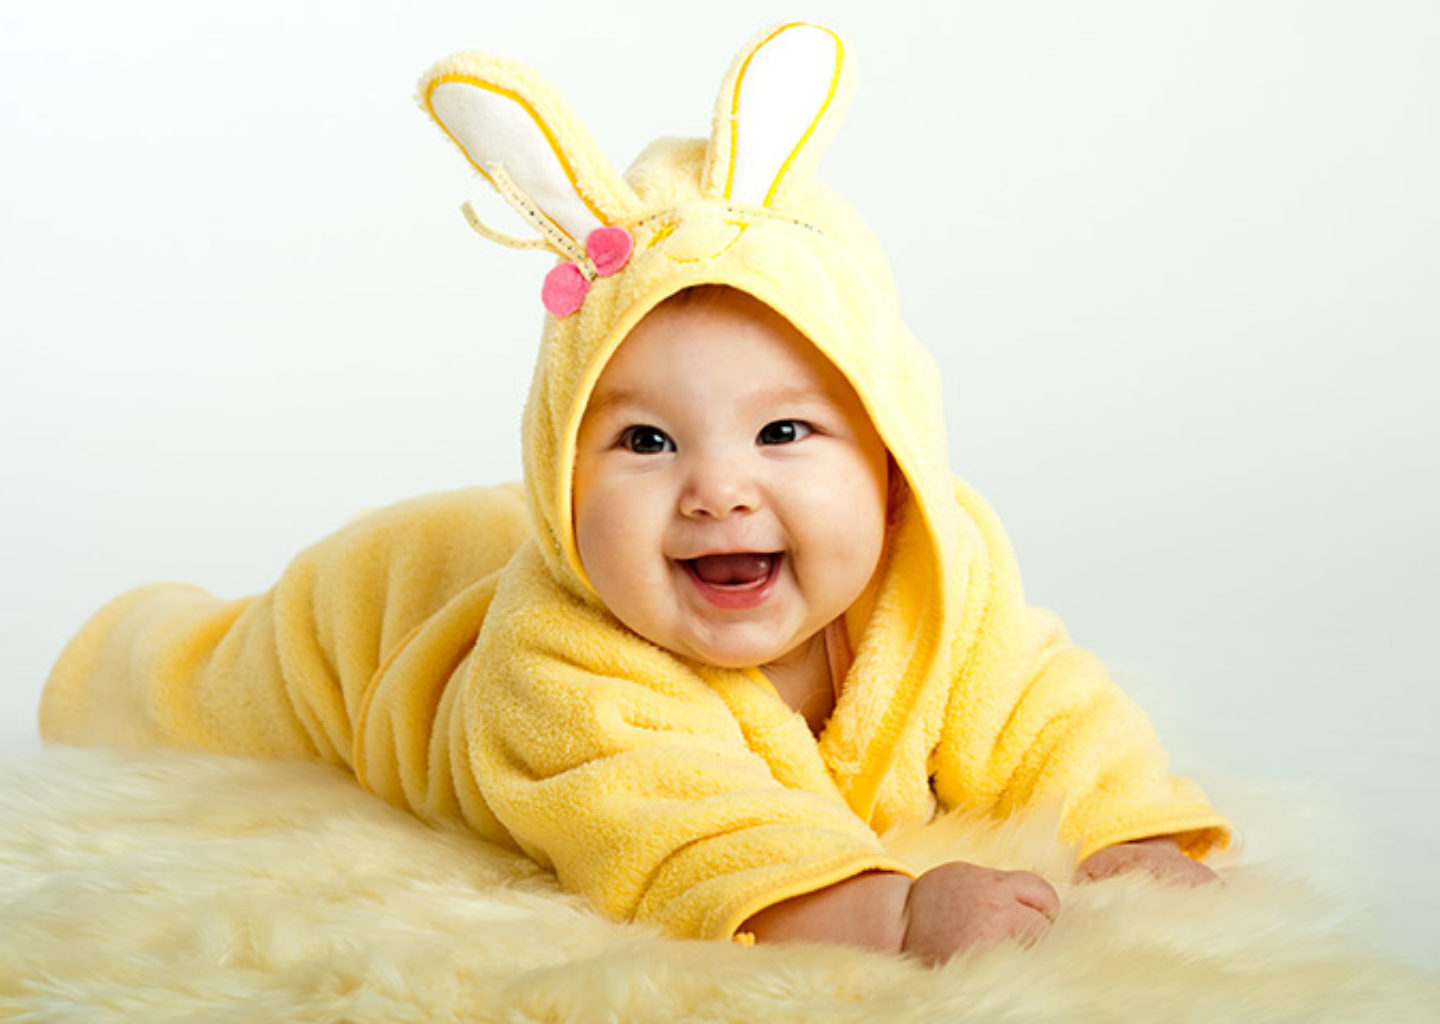 Cute Baby Photos With A Smile - HD Wallpaper 